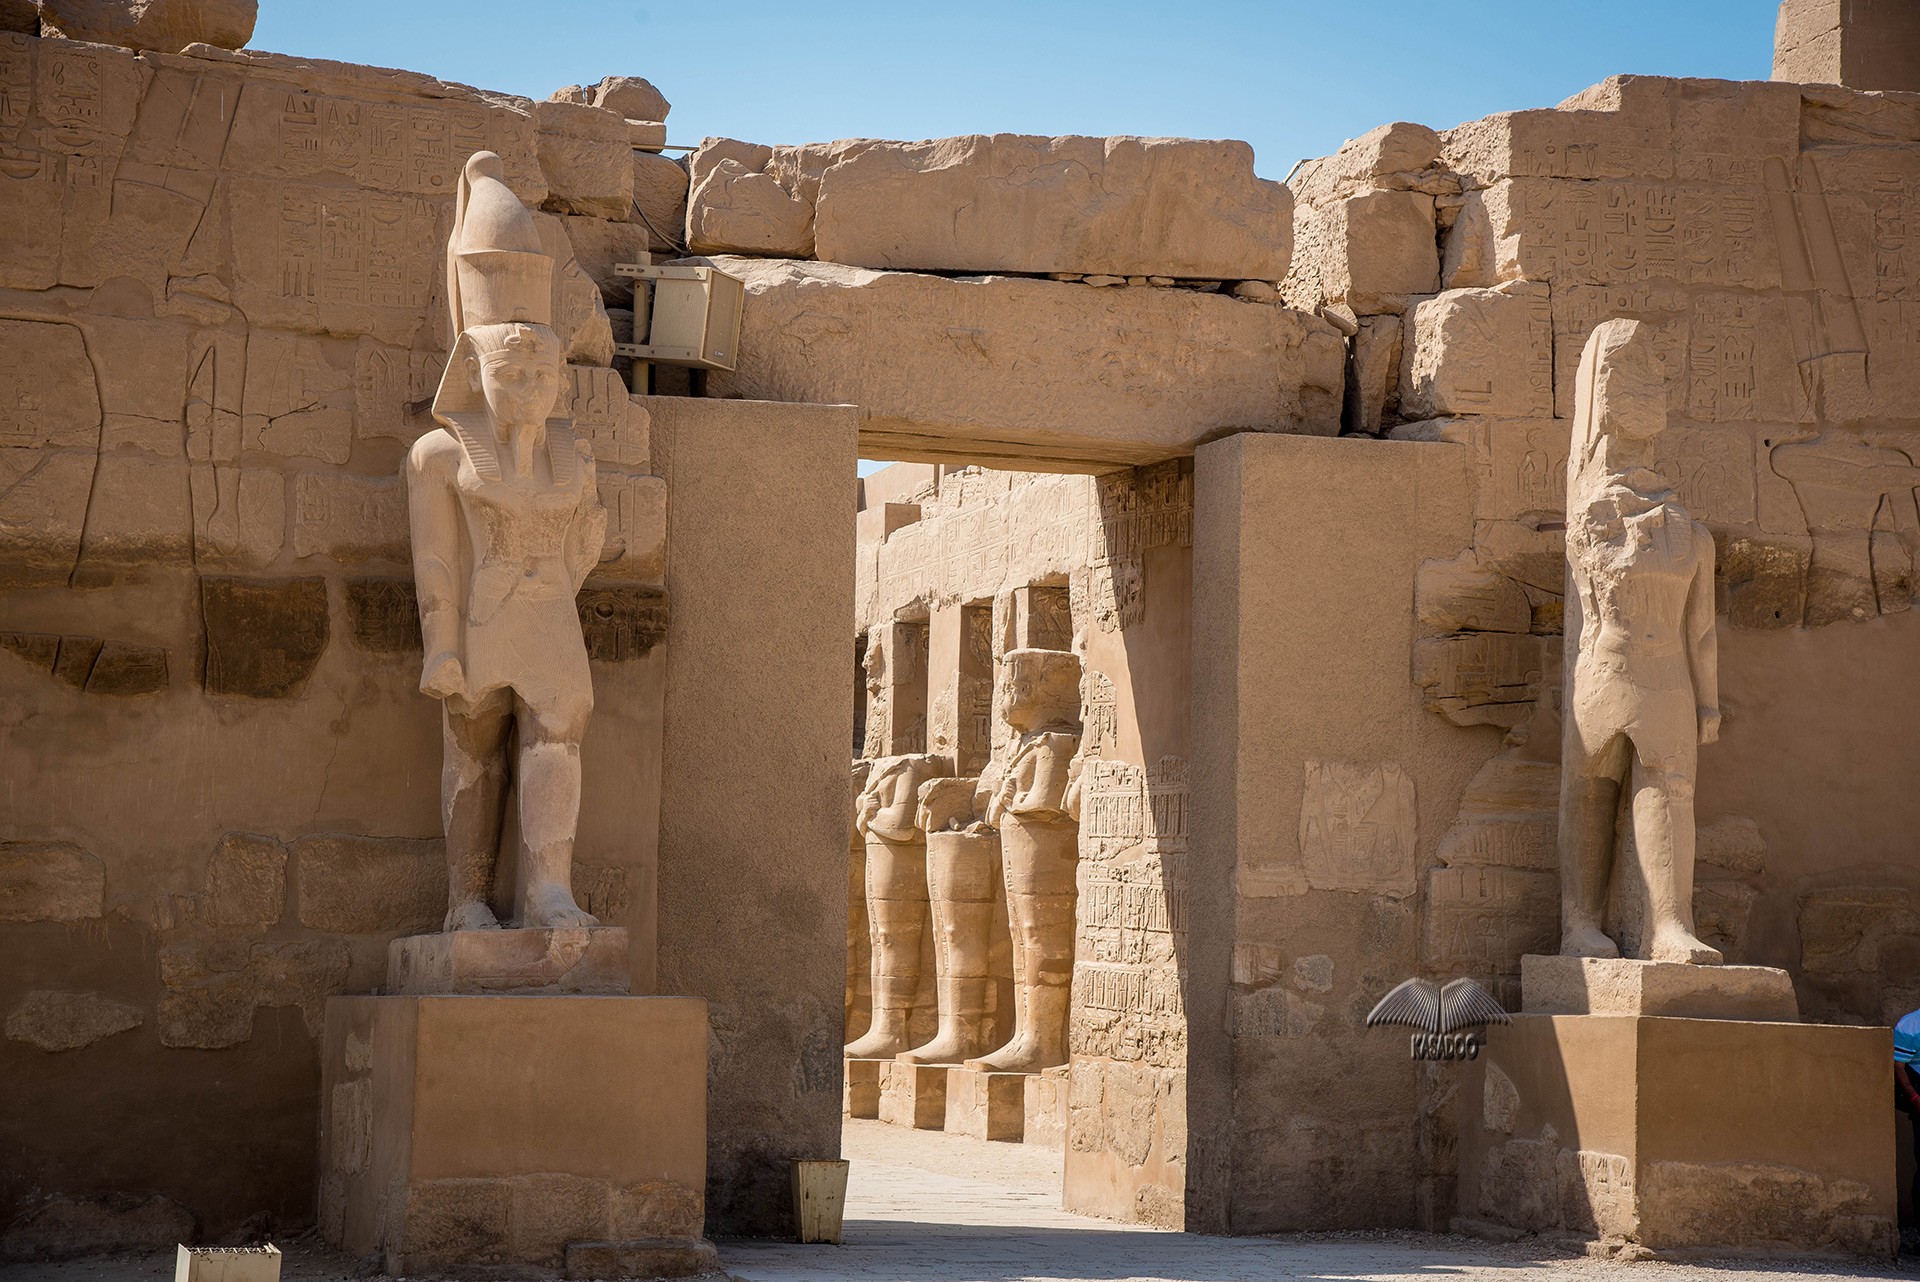 The statues of Pharaohs